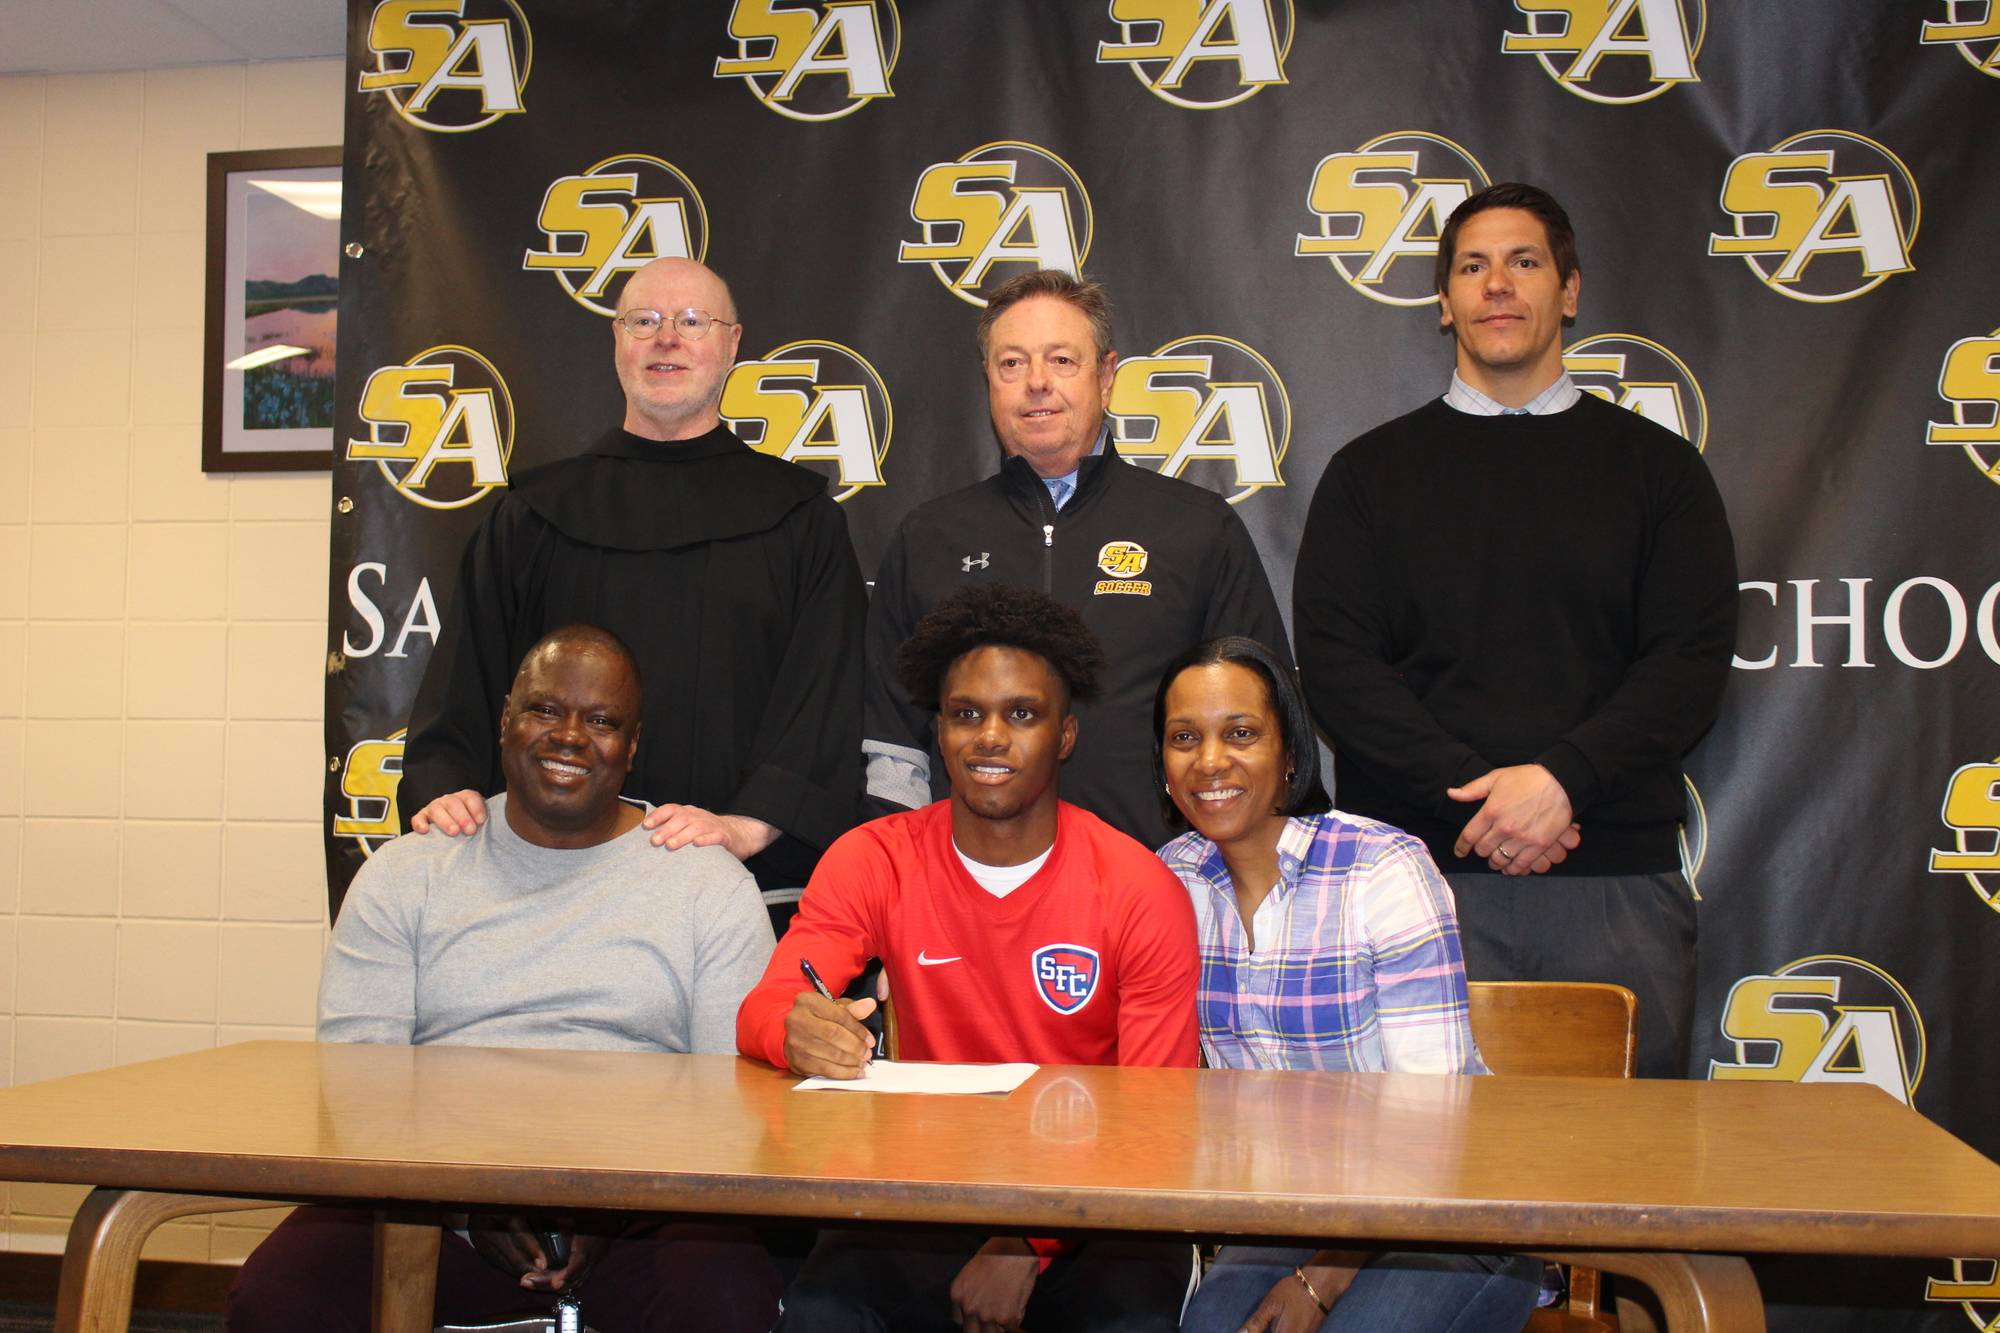 Congratulations Jevon Burke on committing to St. Francis College to play soccer